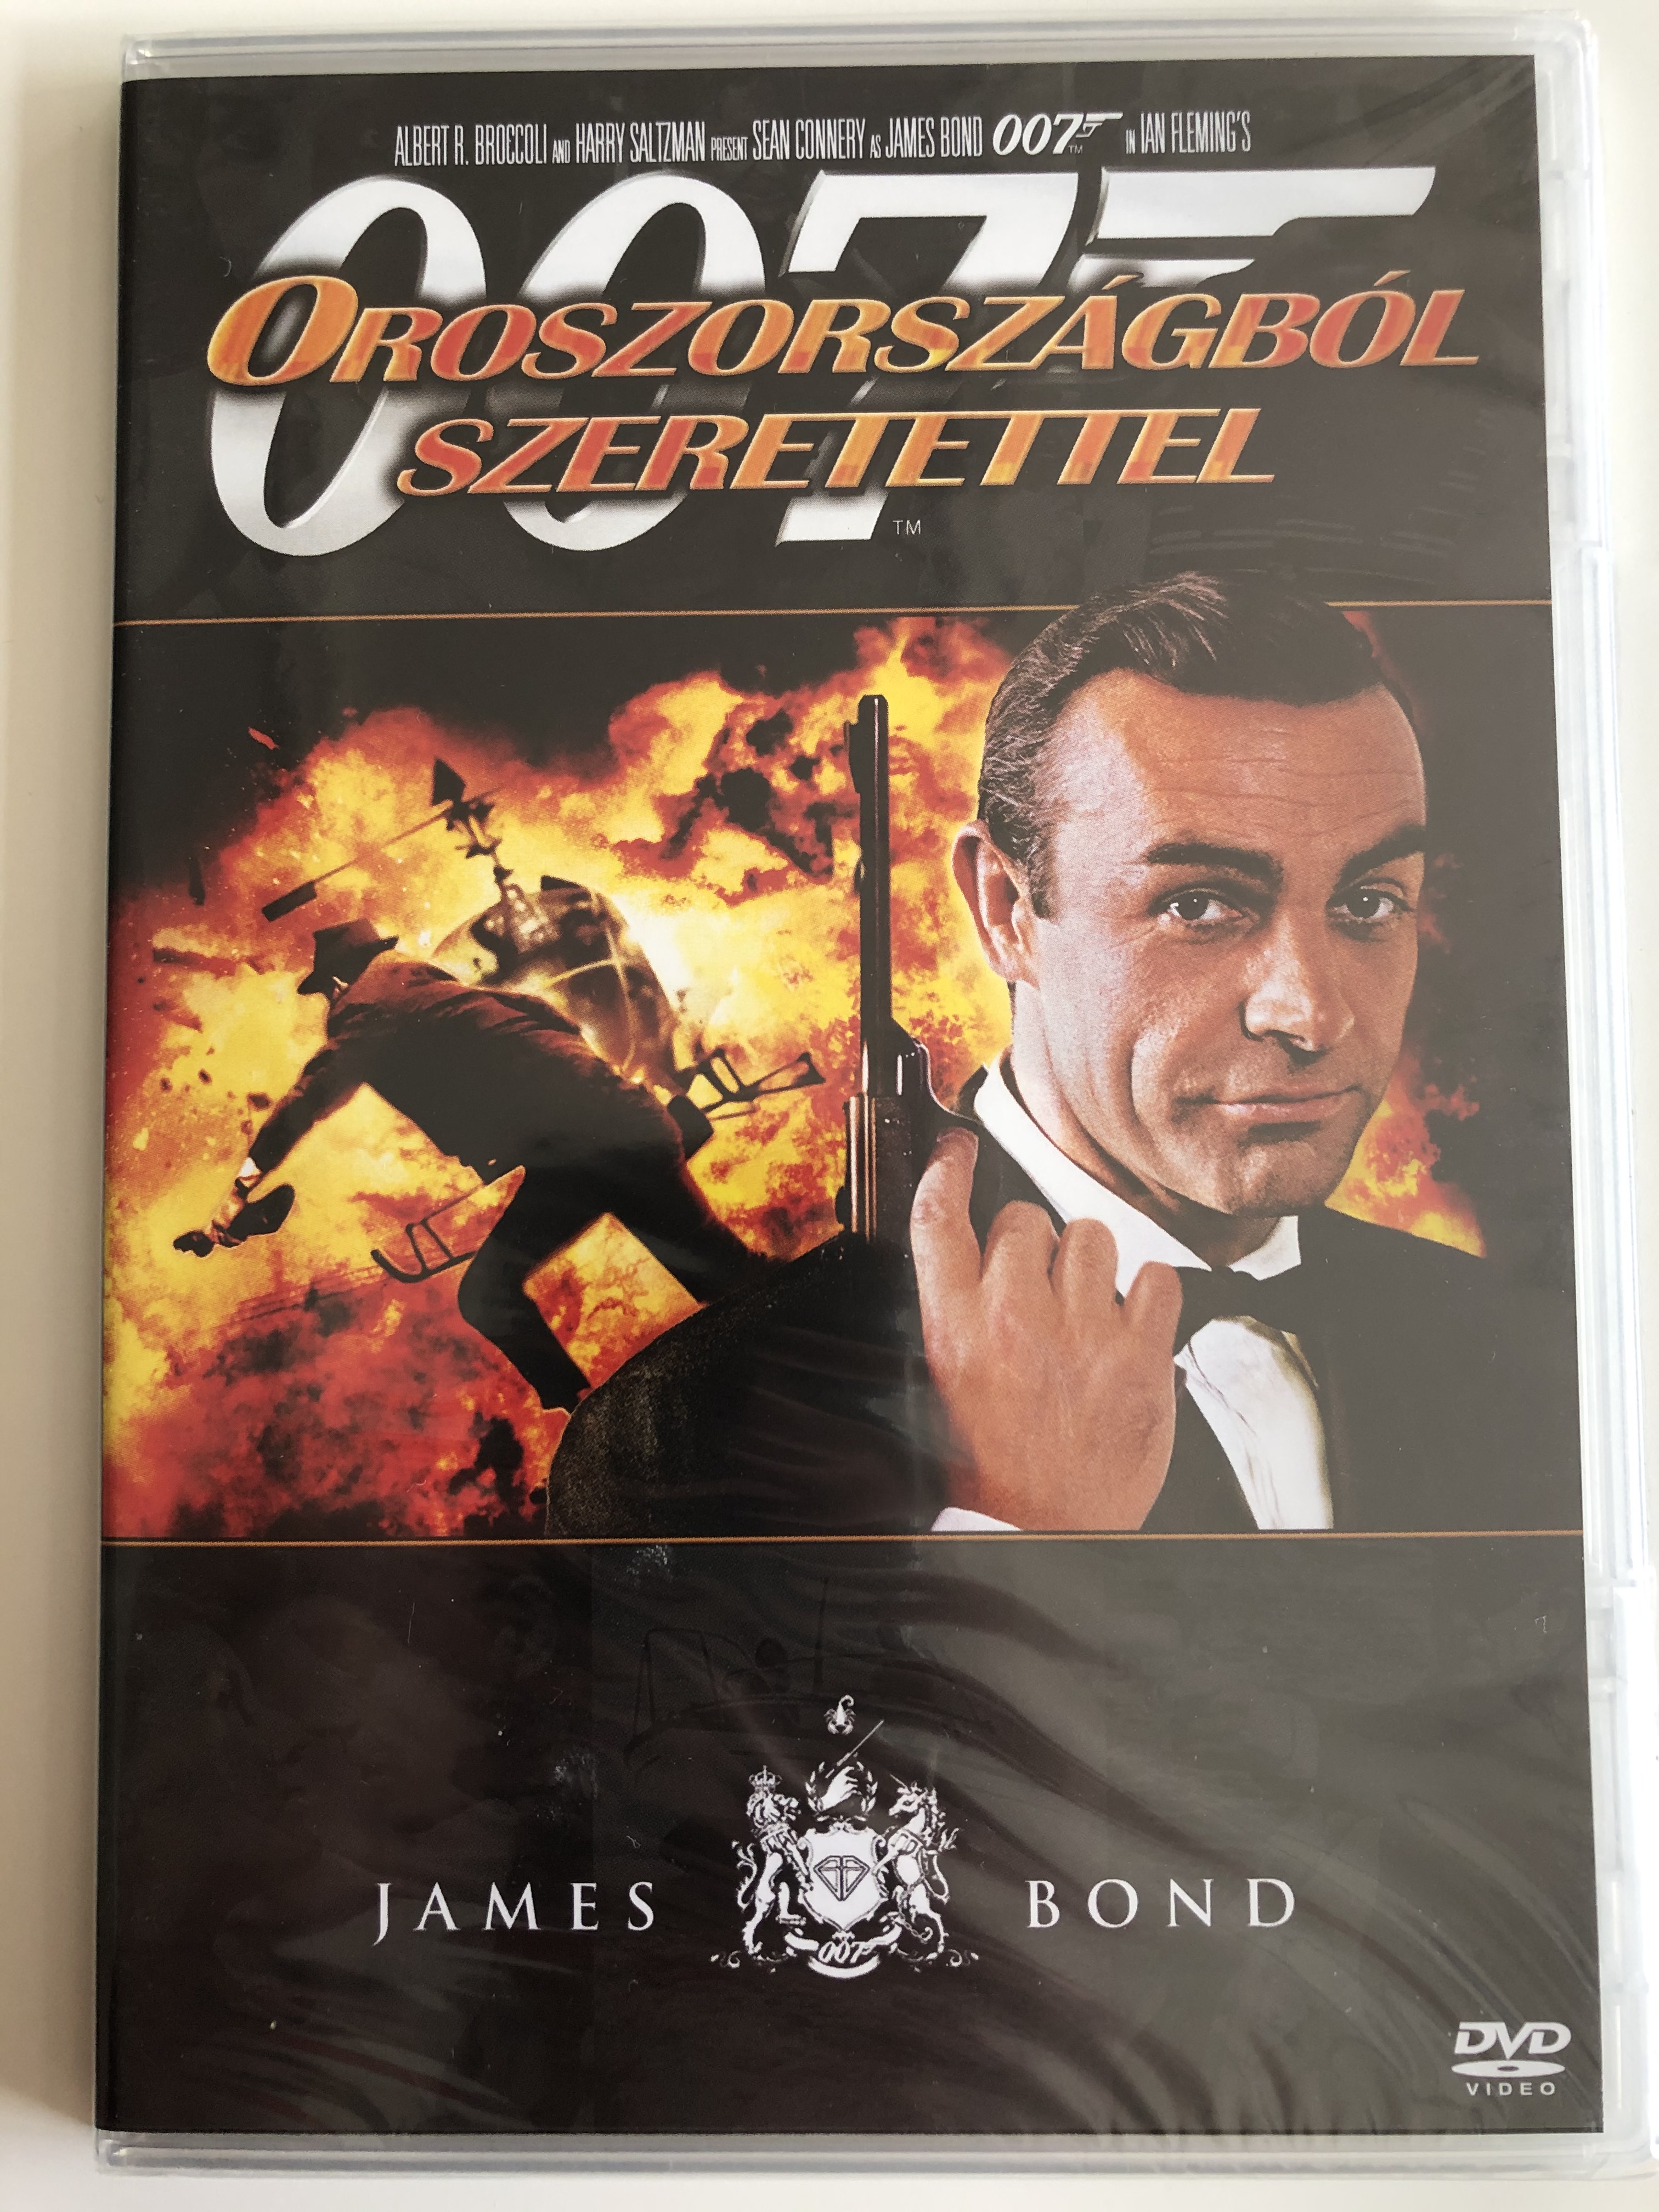 James Bond 007 - From Russia with love DVD 1963  1.JPG